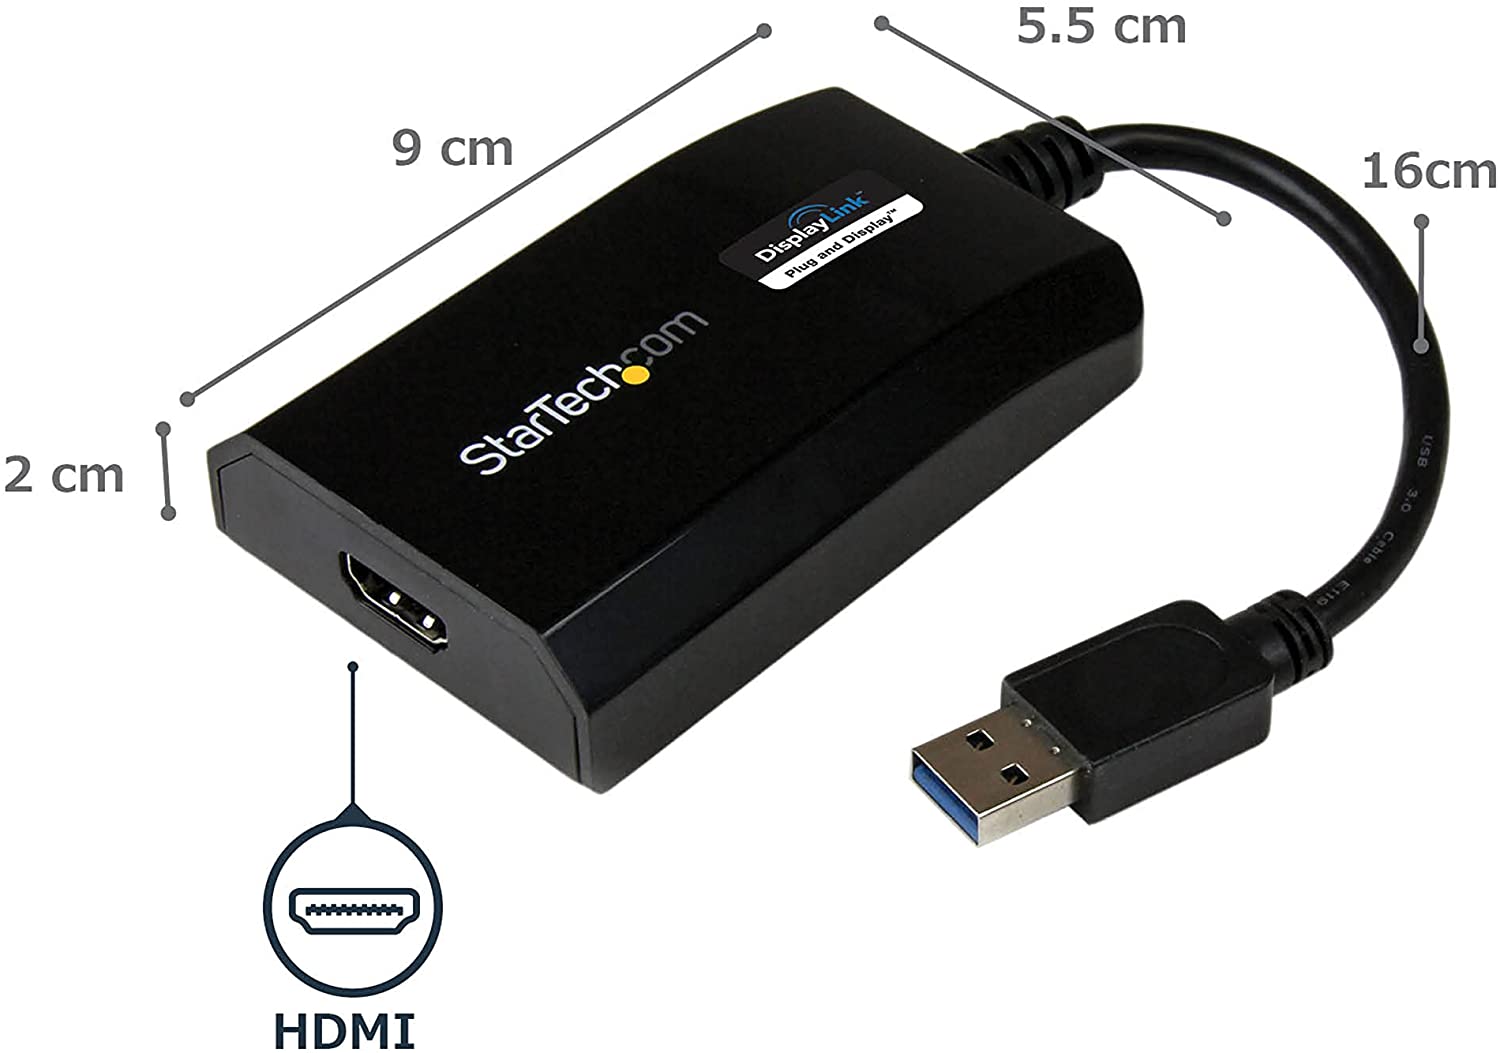 StarTech USB 3.0 TO HDMI EXTERNAL MULTI MONITOR ADAPTER(USB32HDPRO) - Win-Pro Consultancy Pte Ltd